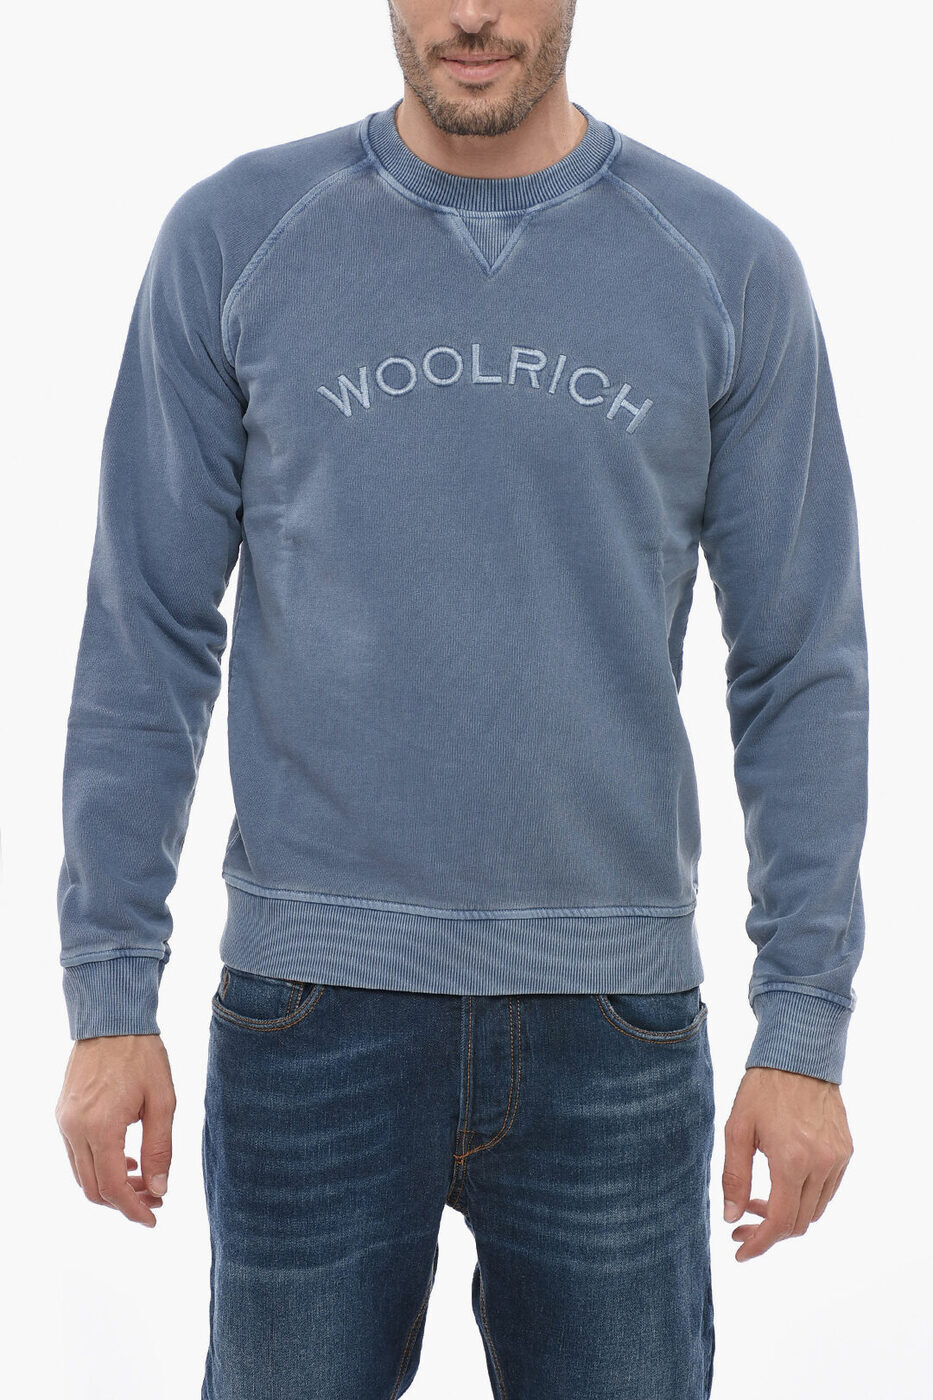 WOOLRICH ウールリッチ トレーナー CFWOSW0187MRUT3470313 メンズ SOLID COLOR SWEATSHIRT WITH EMBOSSED LOGO 【関税・送料無料】【ラッピング無料】 dk